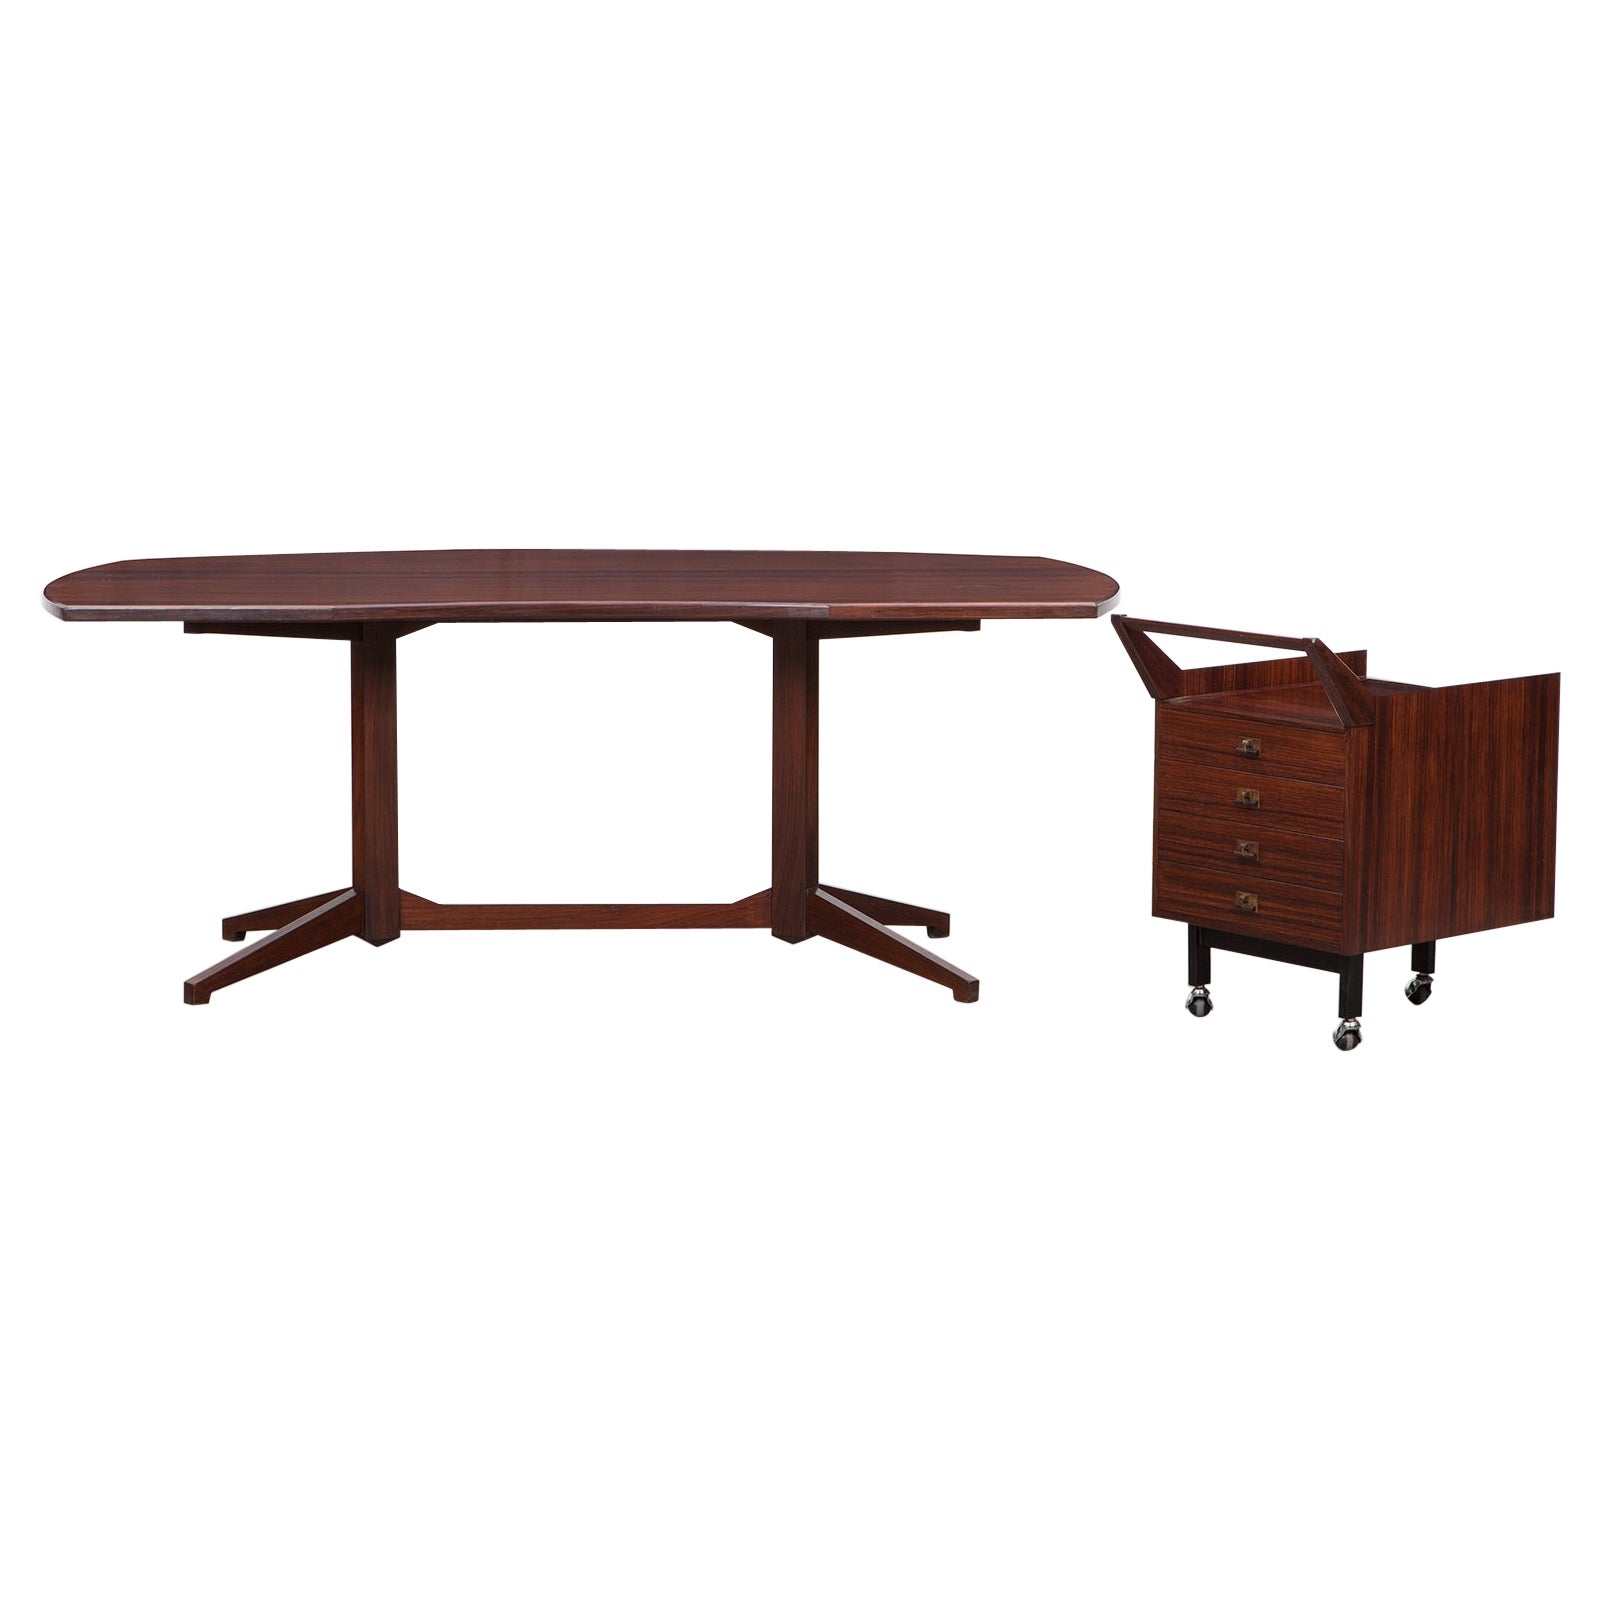 1950s Brown Wooden Desk with Matching Container by Franco Albini